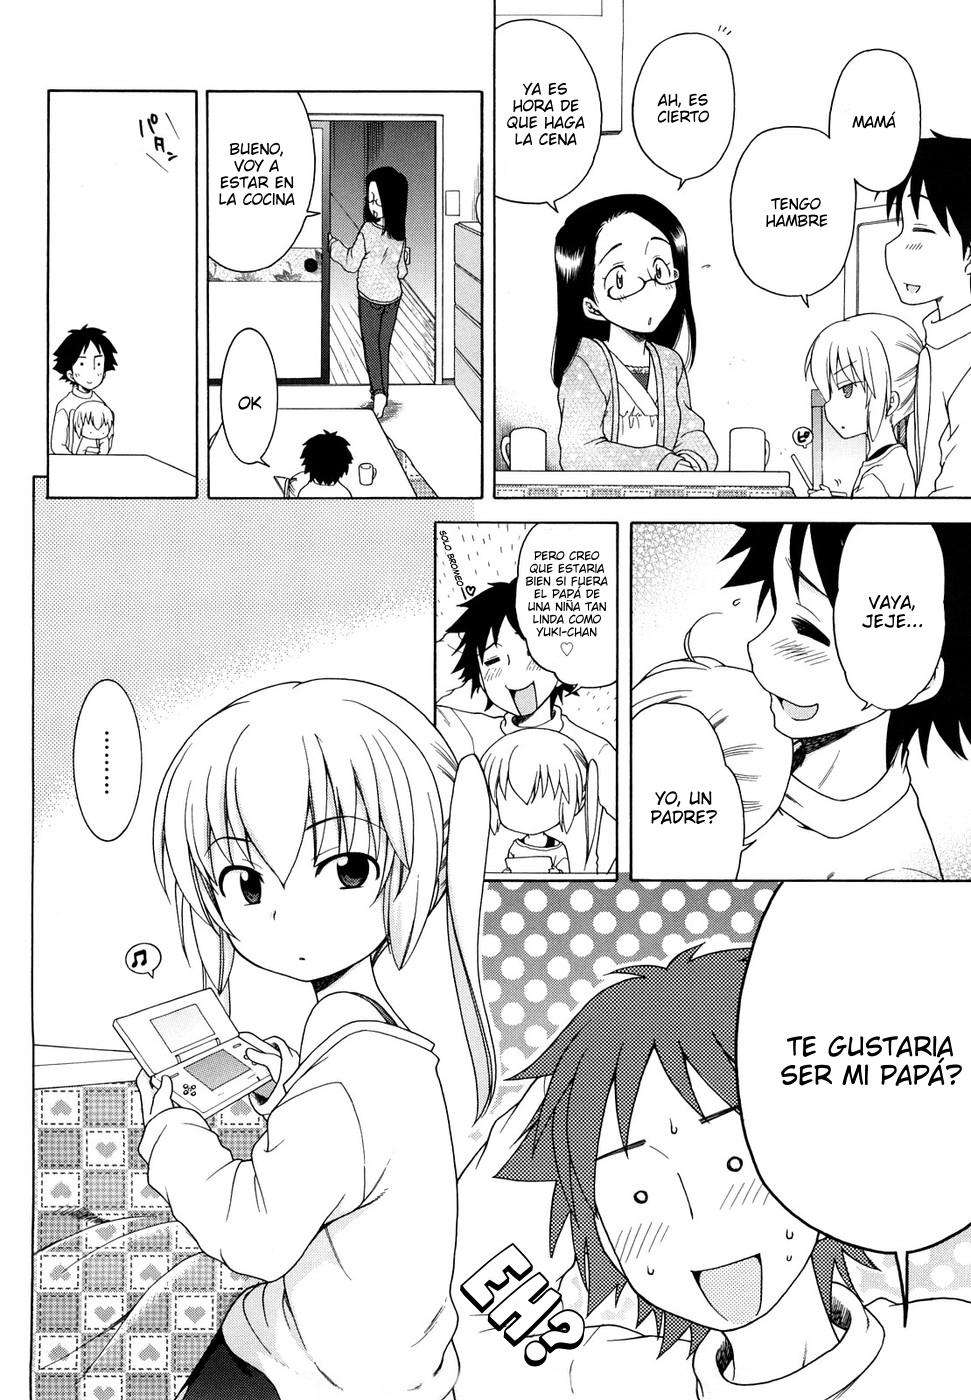 Me gustas Onii-chan! Chapter-6 - 3